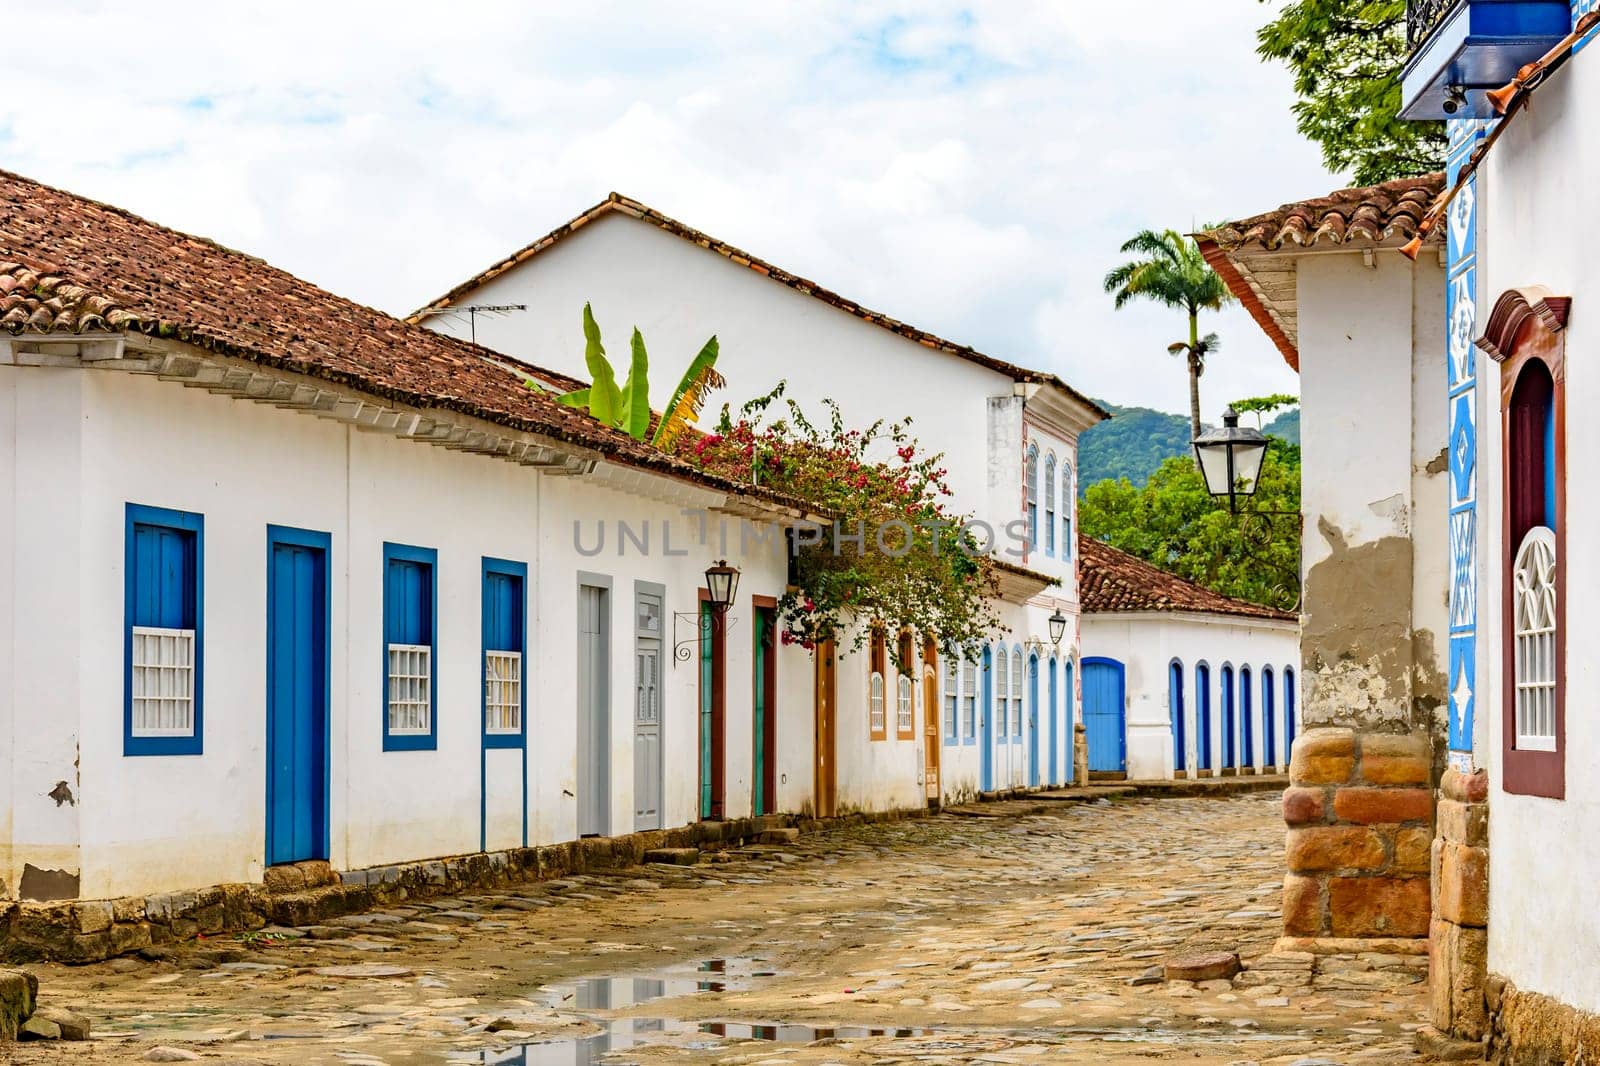 Streets of cobblestone and old houses in colonial style on the streets of the old and historic city of Paraty founded in the 17th century on the coast of the state of Rio de Janeiro, Brazil